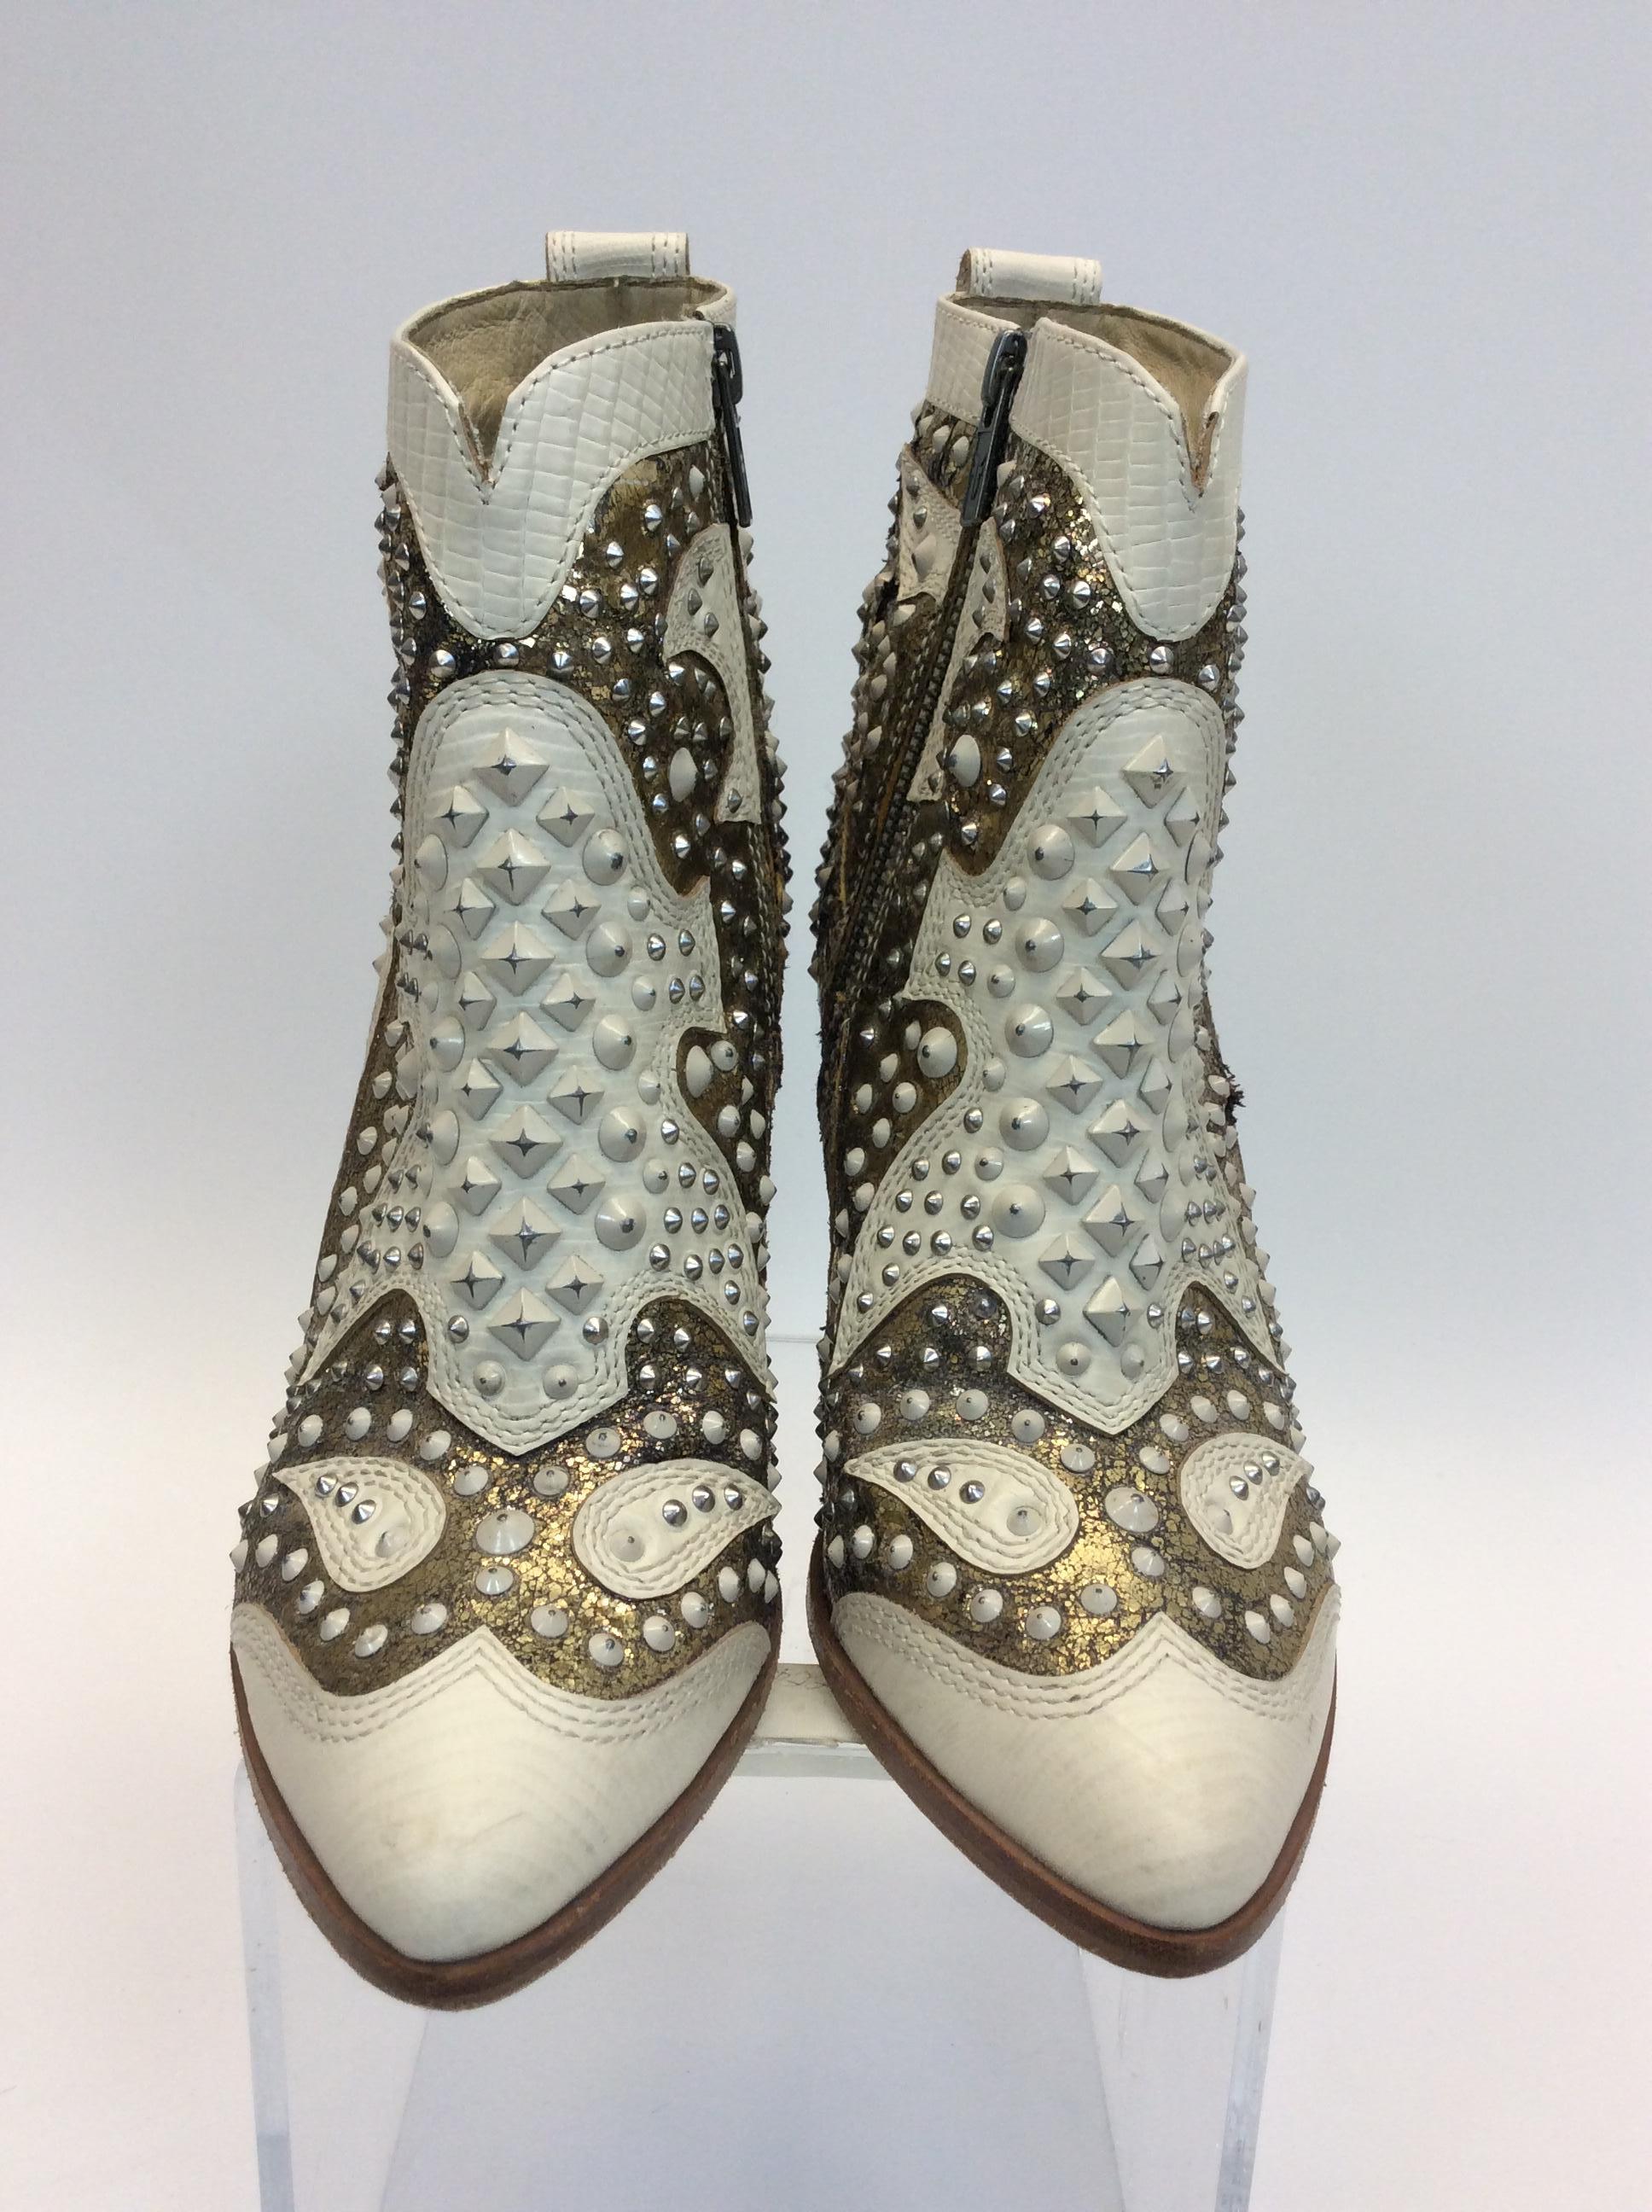 Frye White Leather Remy Studded Ankle Boots
$299
Made in Vietnam
Size 8.5
4.5